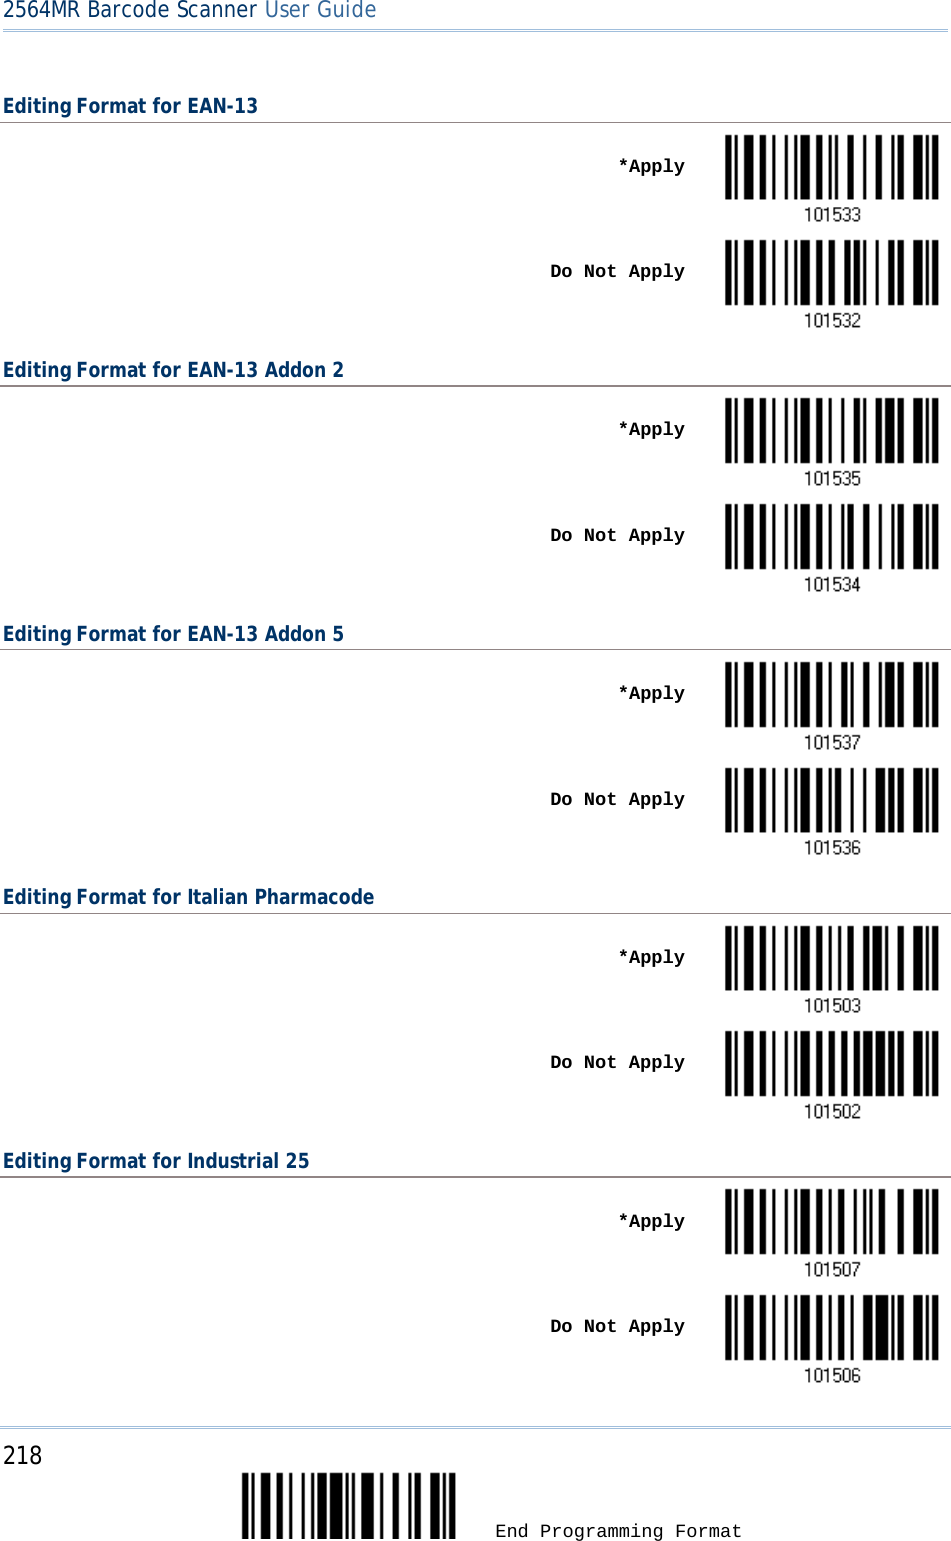 2564MR Barcode Scanner User Guide  Editing Format for EAN-13    *Apply     Do Not Apply  Editing Format for EAN-13 Addon 2    *Apply     Do Not Apply  Editing Format for EAN-13 Addon 5    *Apply     Do Not Apply  Editing Format for Italian Pharmacode    *Apply     Do Not Apply  Editing Format for Industrial 25    *Apply     Do Not Apply  218  End Programming Format 